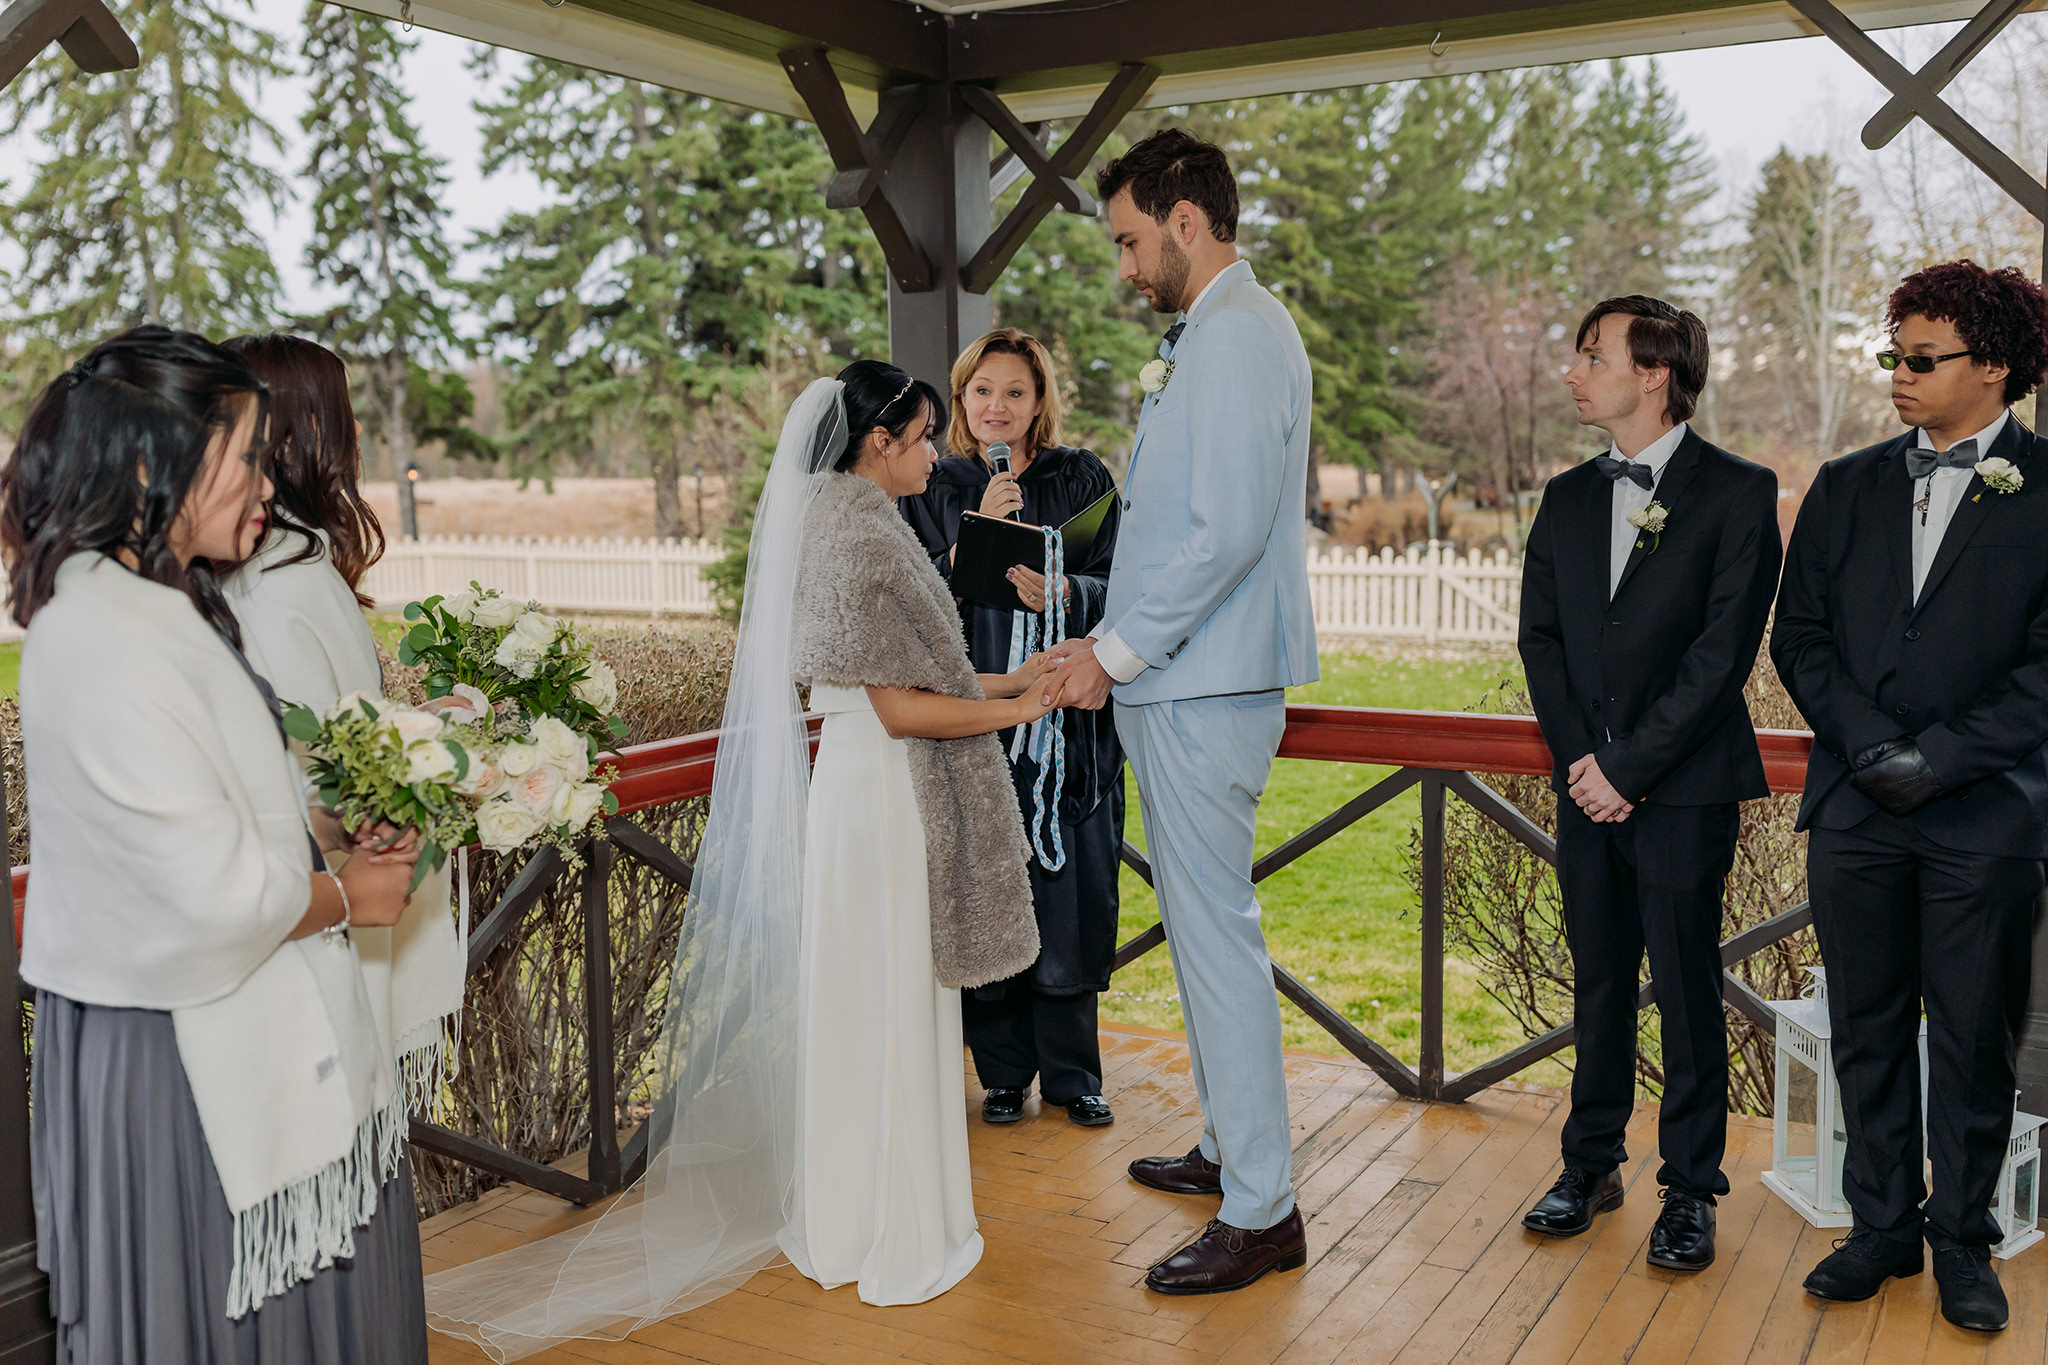 intimate calgary wedding at Bow Valley Ranche on stormy October day